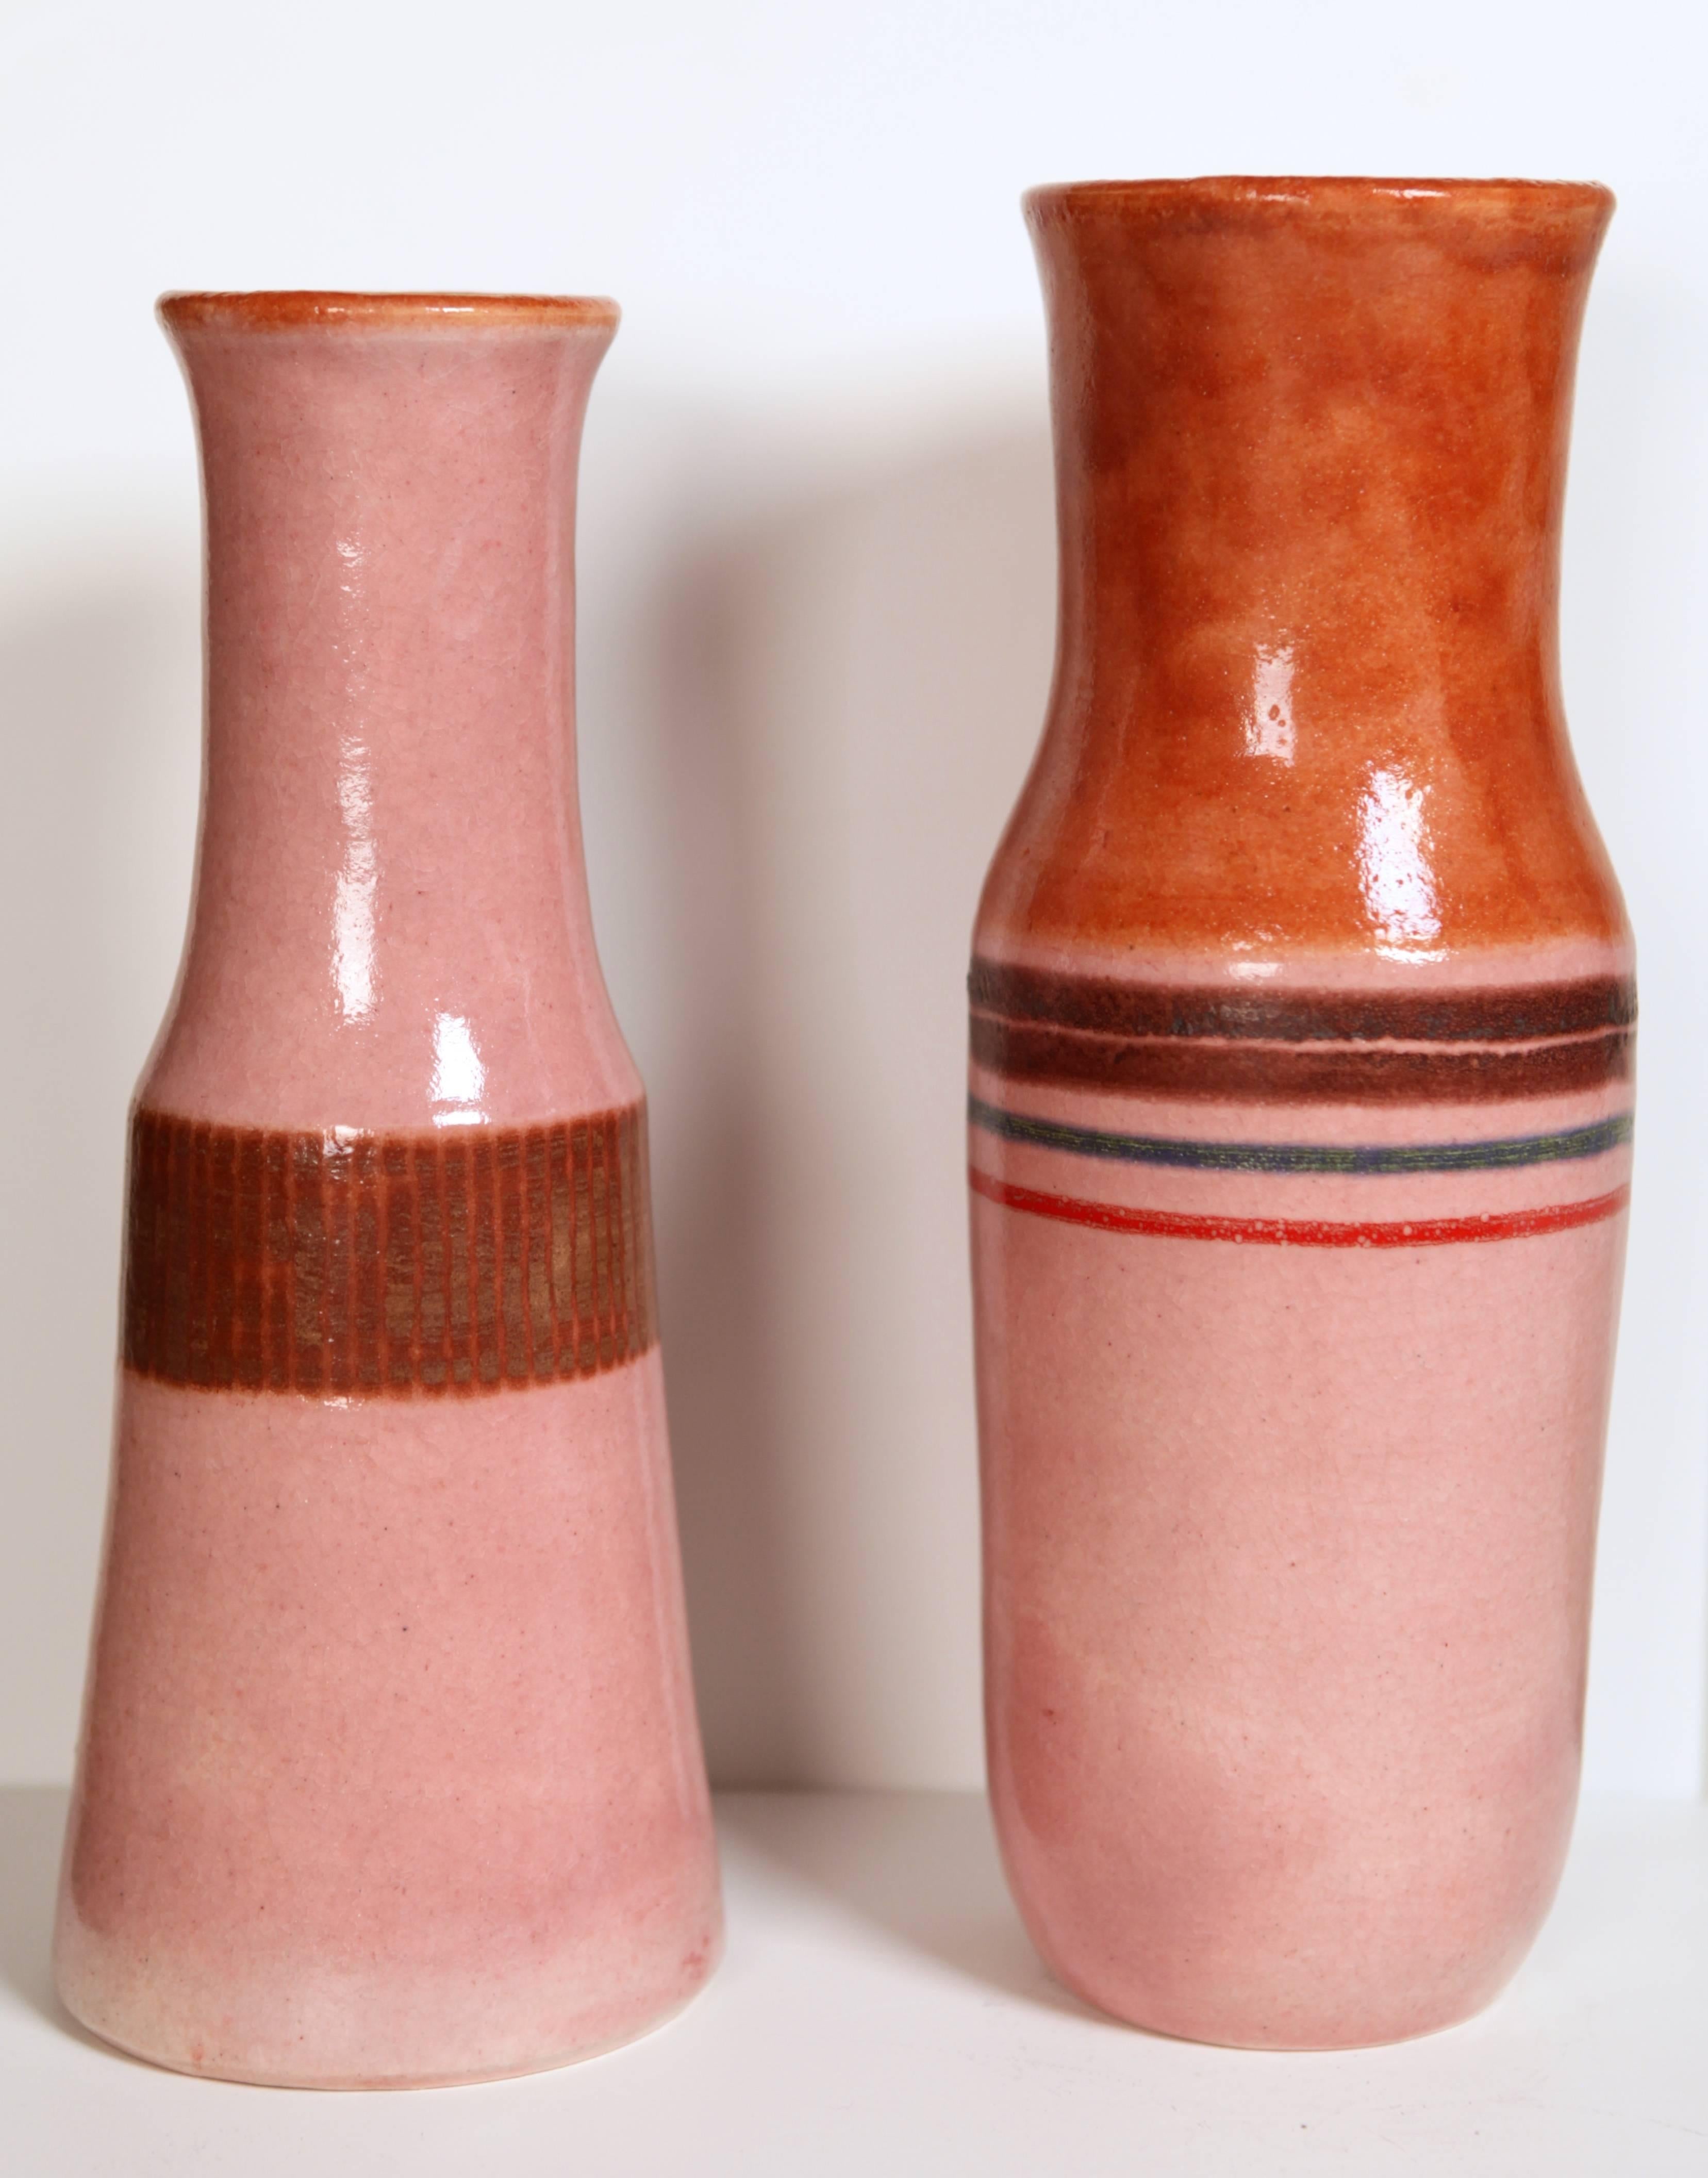 Bruno Gambone (*1936)
Two vases, ceramic glazed
Limited edition
created in 1969 and 1979
Italy
signed: Gambone, Italy, to the underside
Measure: left height 32cm x 12.5 cm diameter
right height 34cm x 12.5 cm diameter.